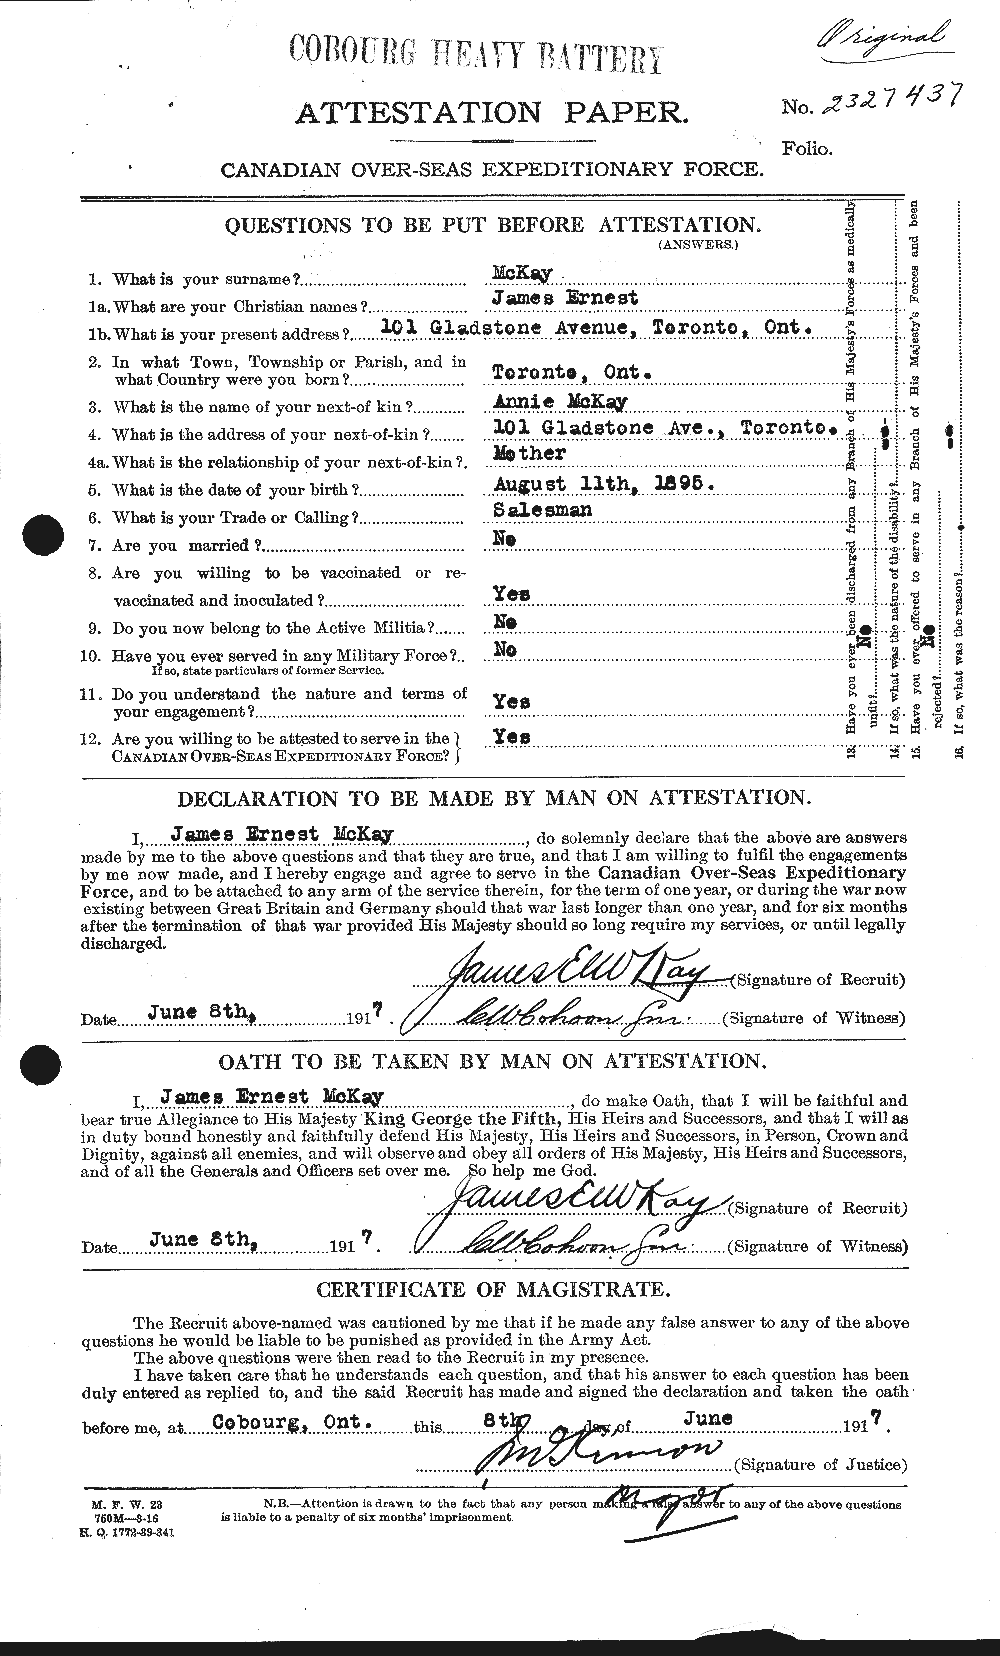 Personnel Records of the First World War - CEF 534833a